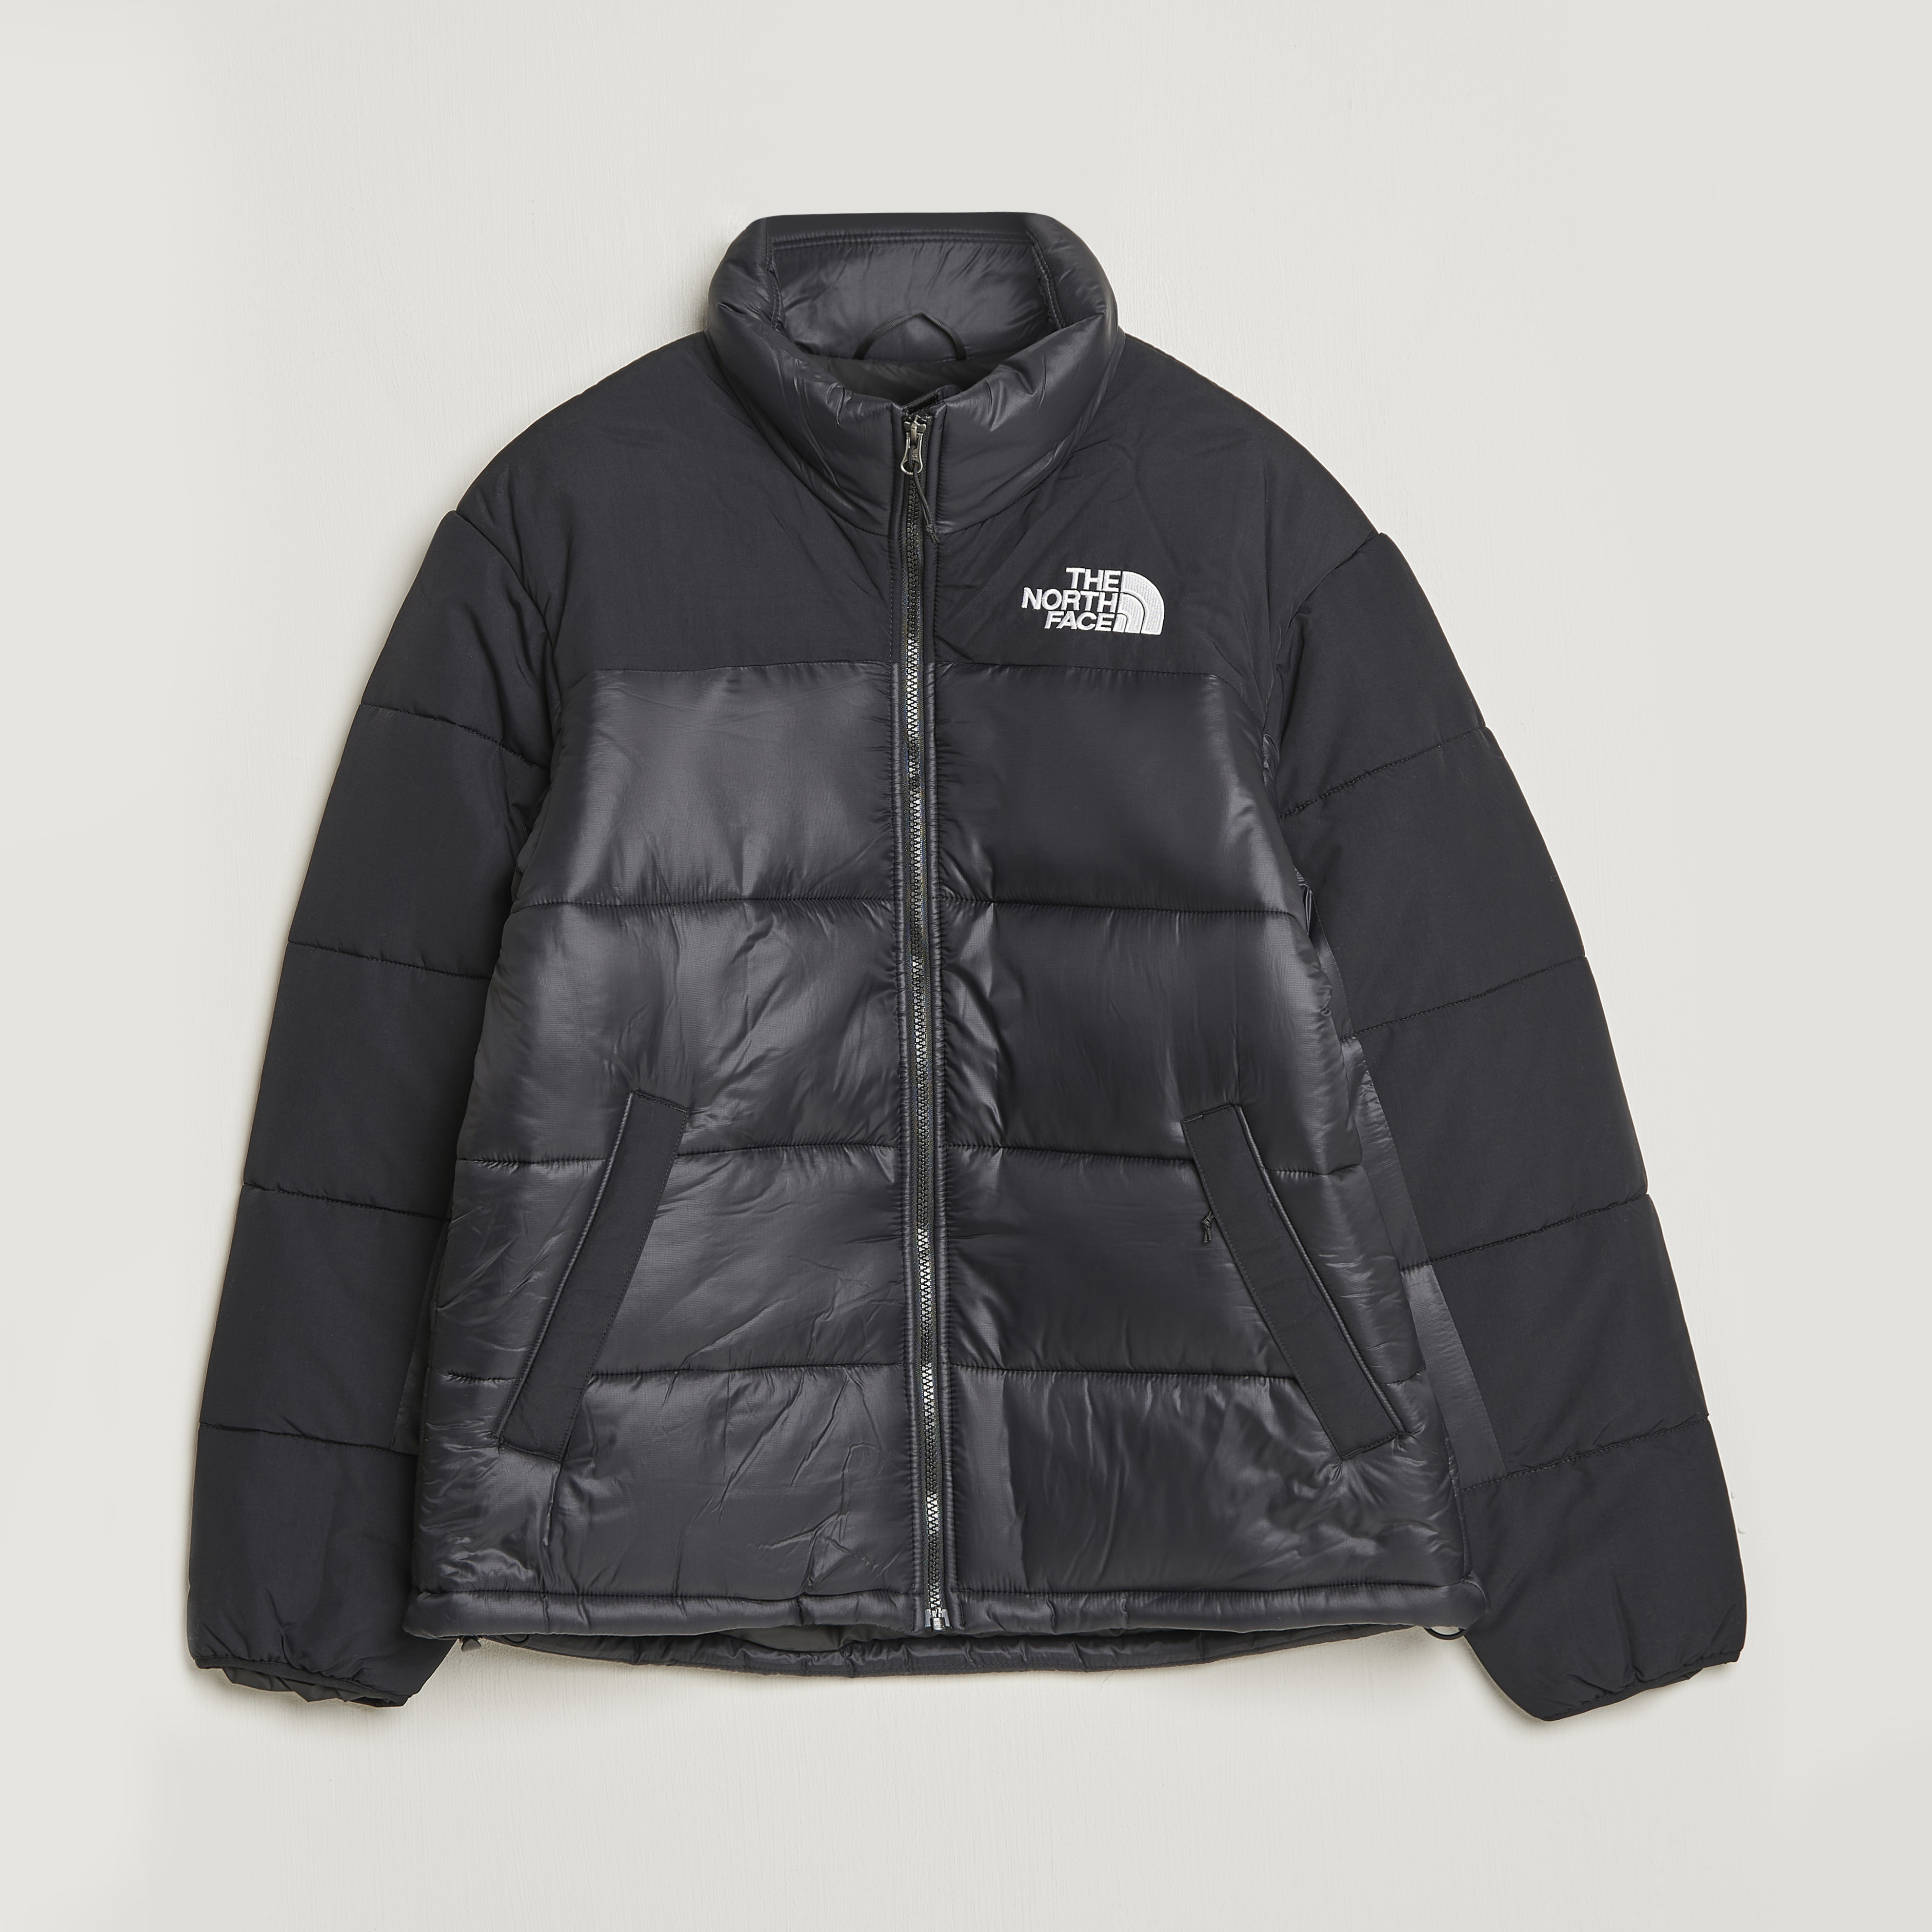 The North Face Himalayan Insulated Puffer Jacket Black at CareOfCarl.com